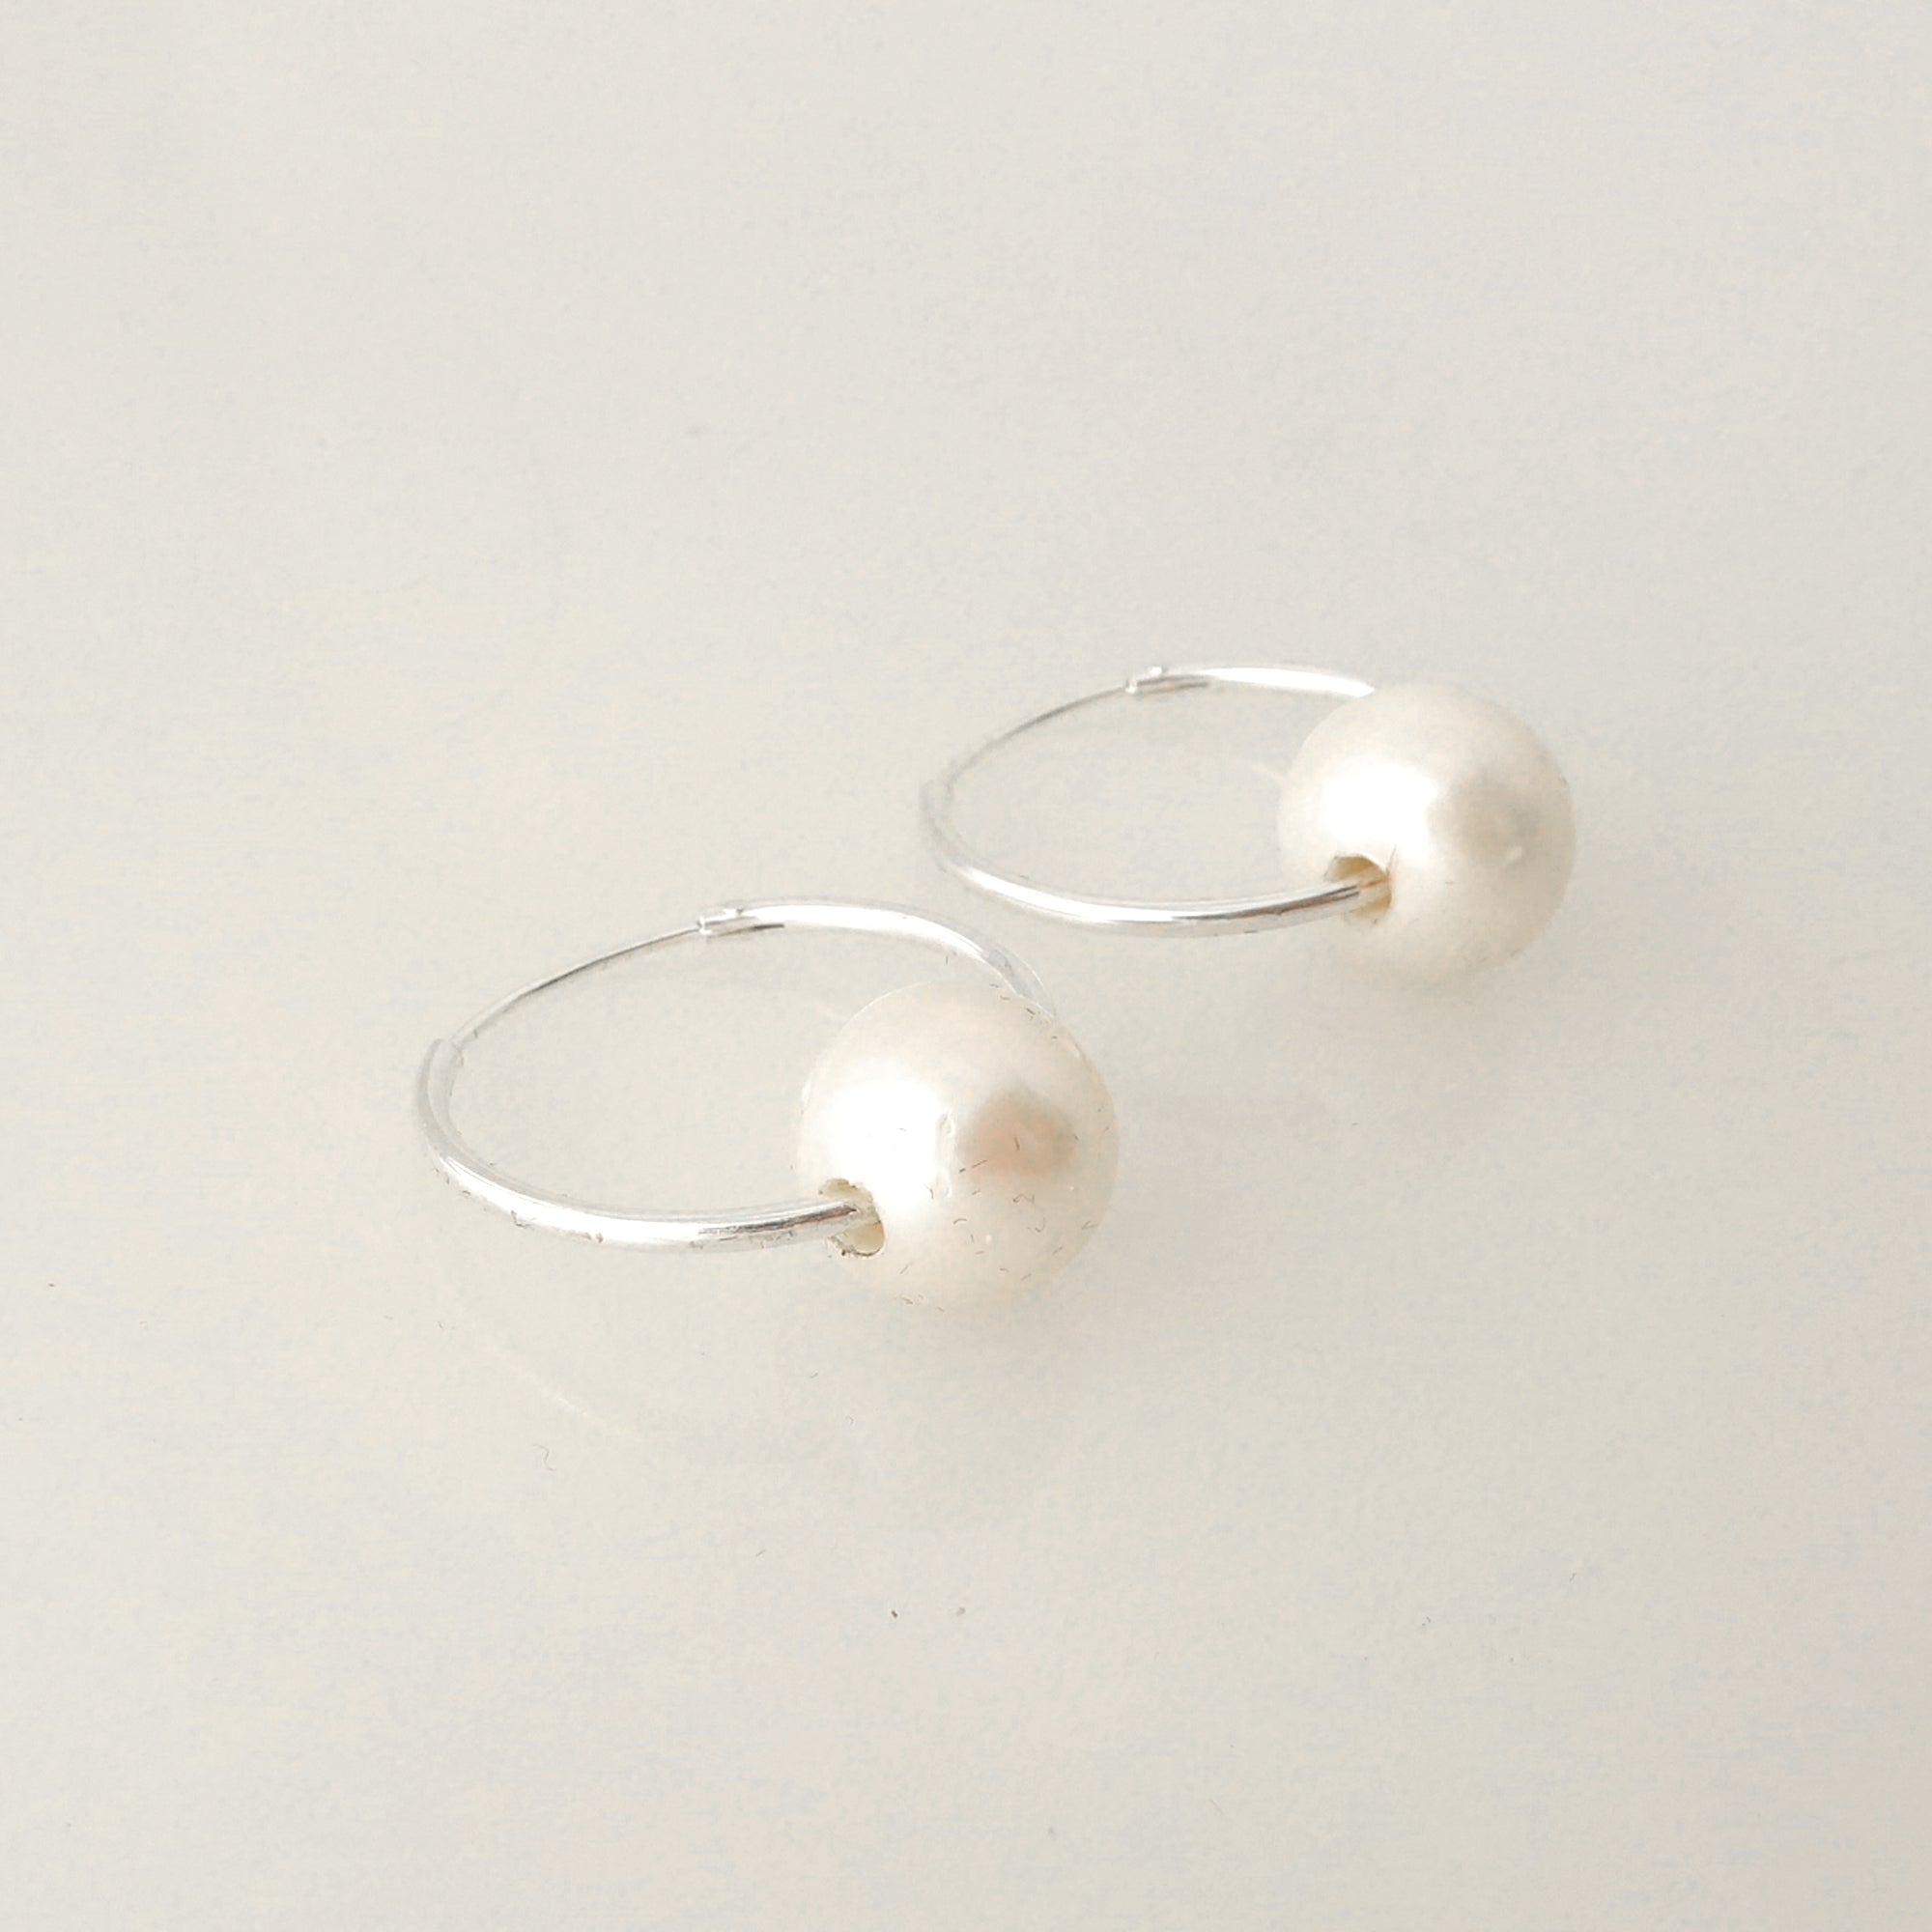 Small sterling silver hoop and pearl earrings by Jenny Dayco 2